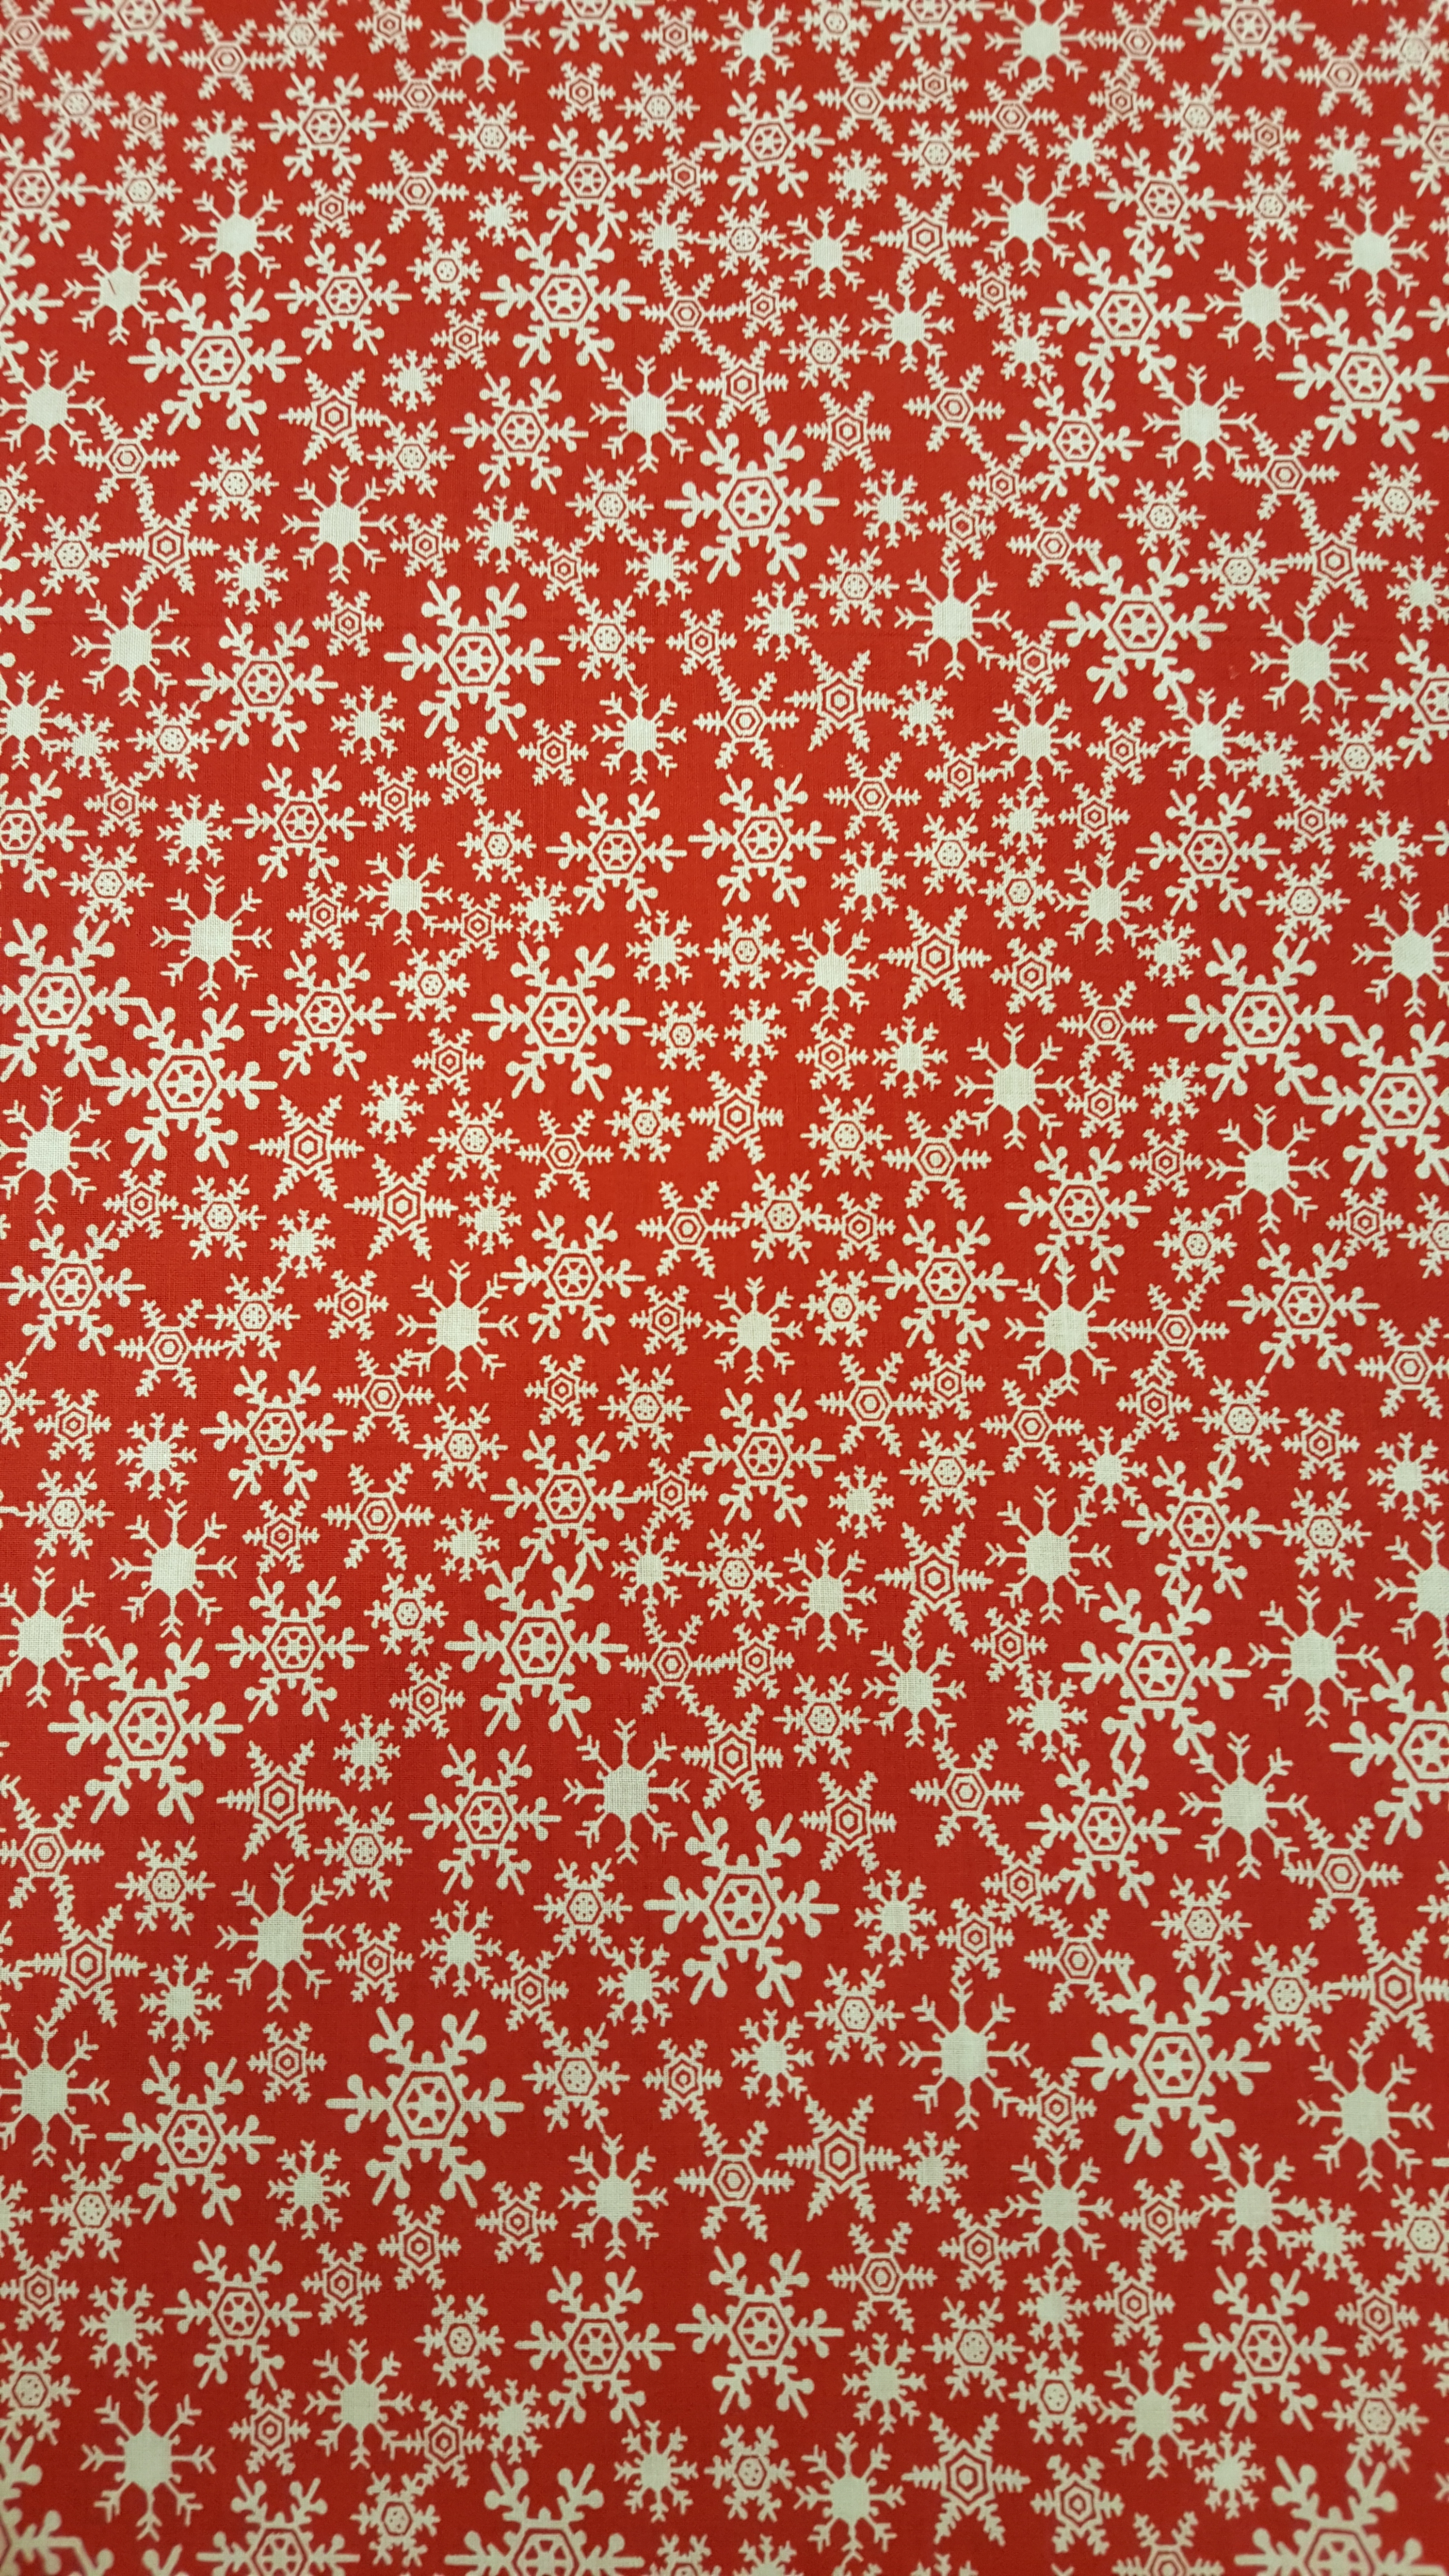 Free photo New Year snowflakes on a red background